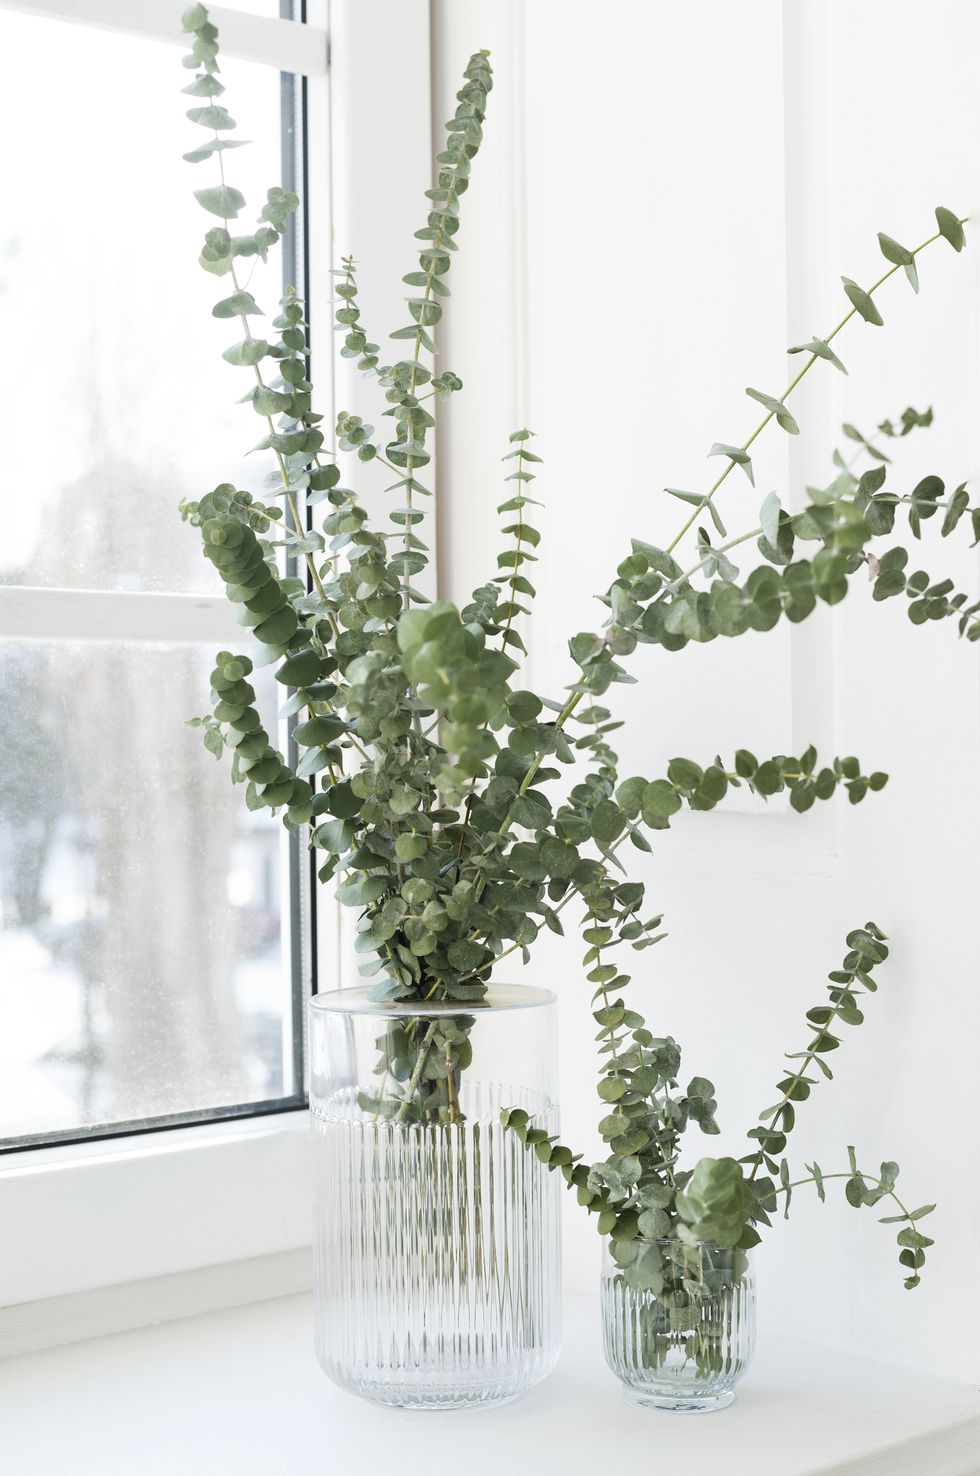 green eucalyptus leaves in vase on white window sill front view place for text, copy space